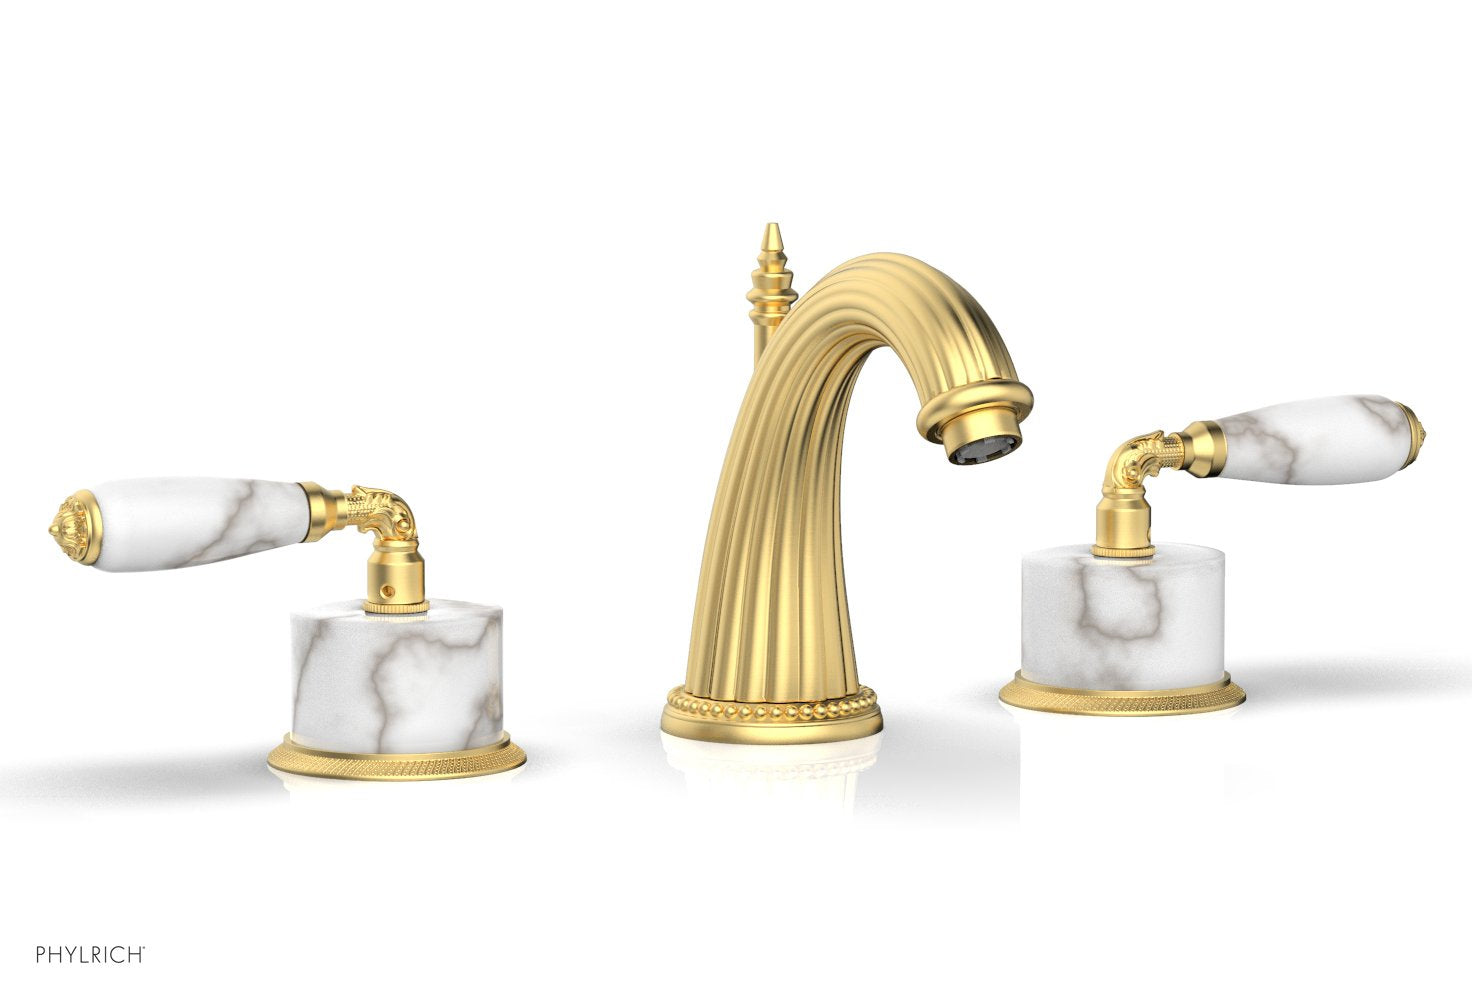 Phylrich VALENCIA Widespread Faucet White Marble